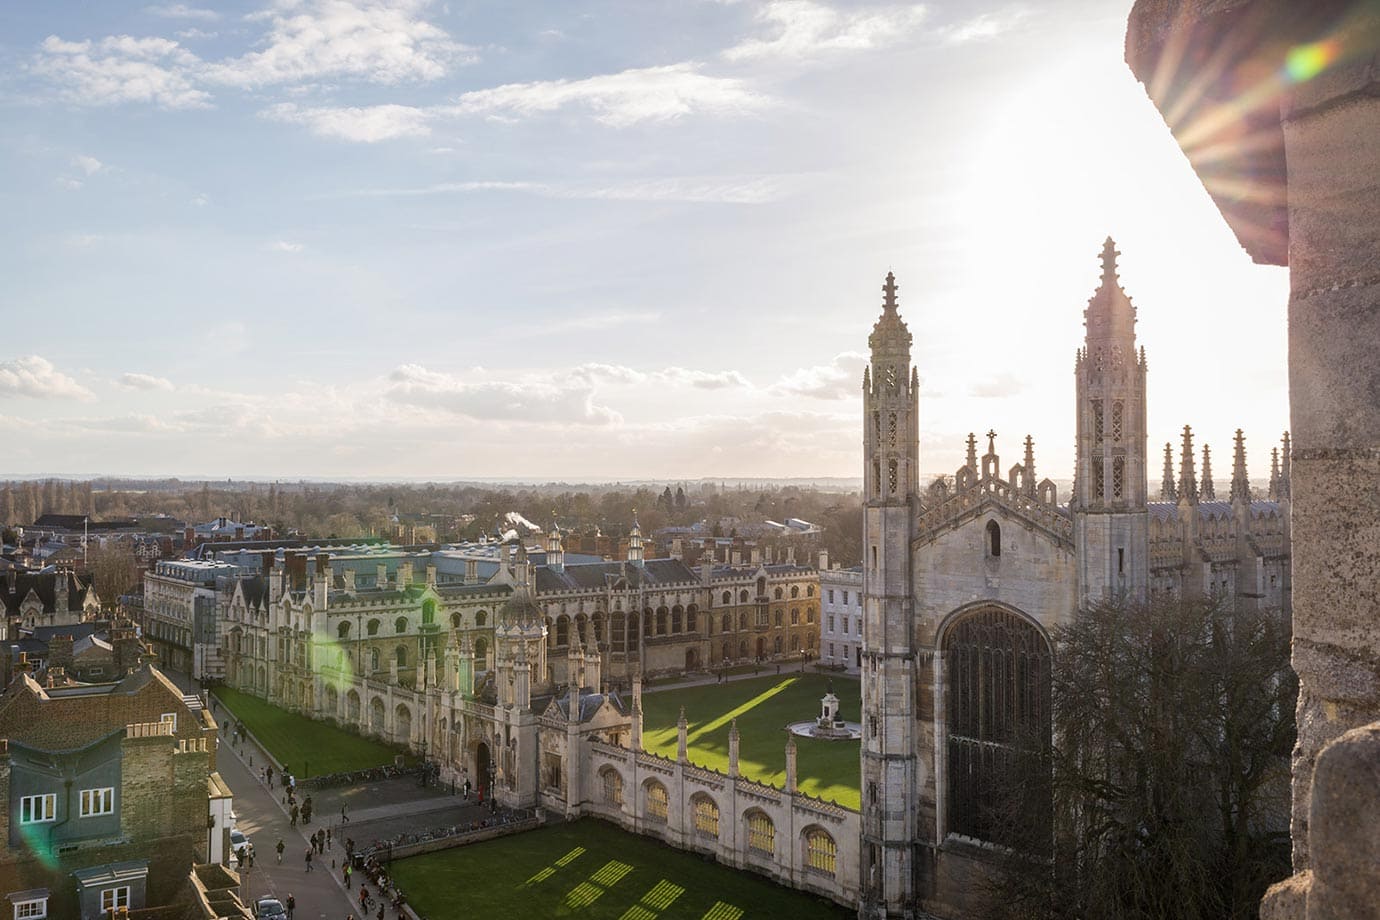 The view of King's College, Cambridge